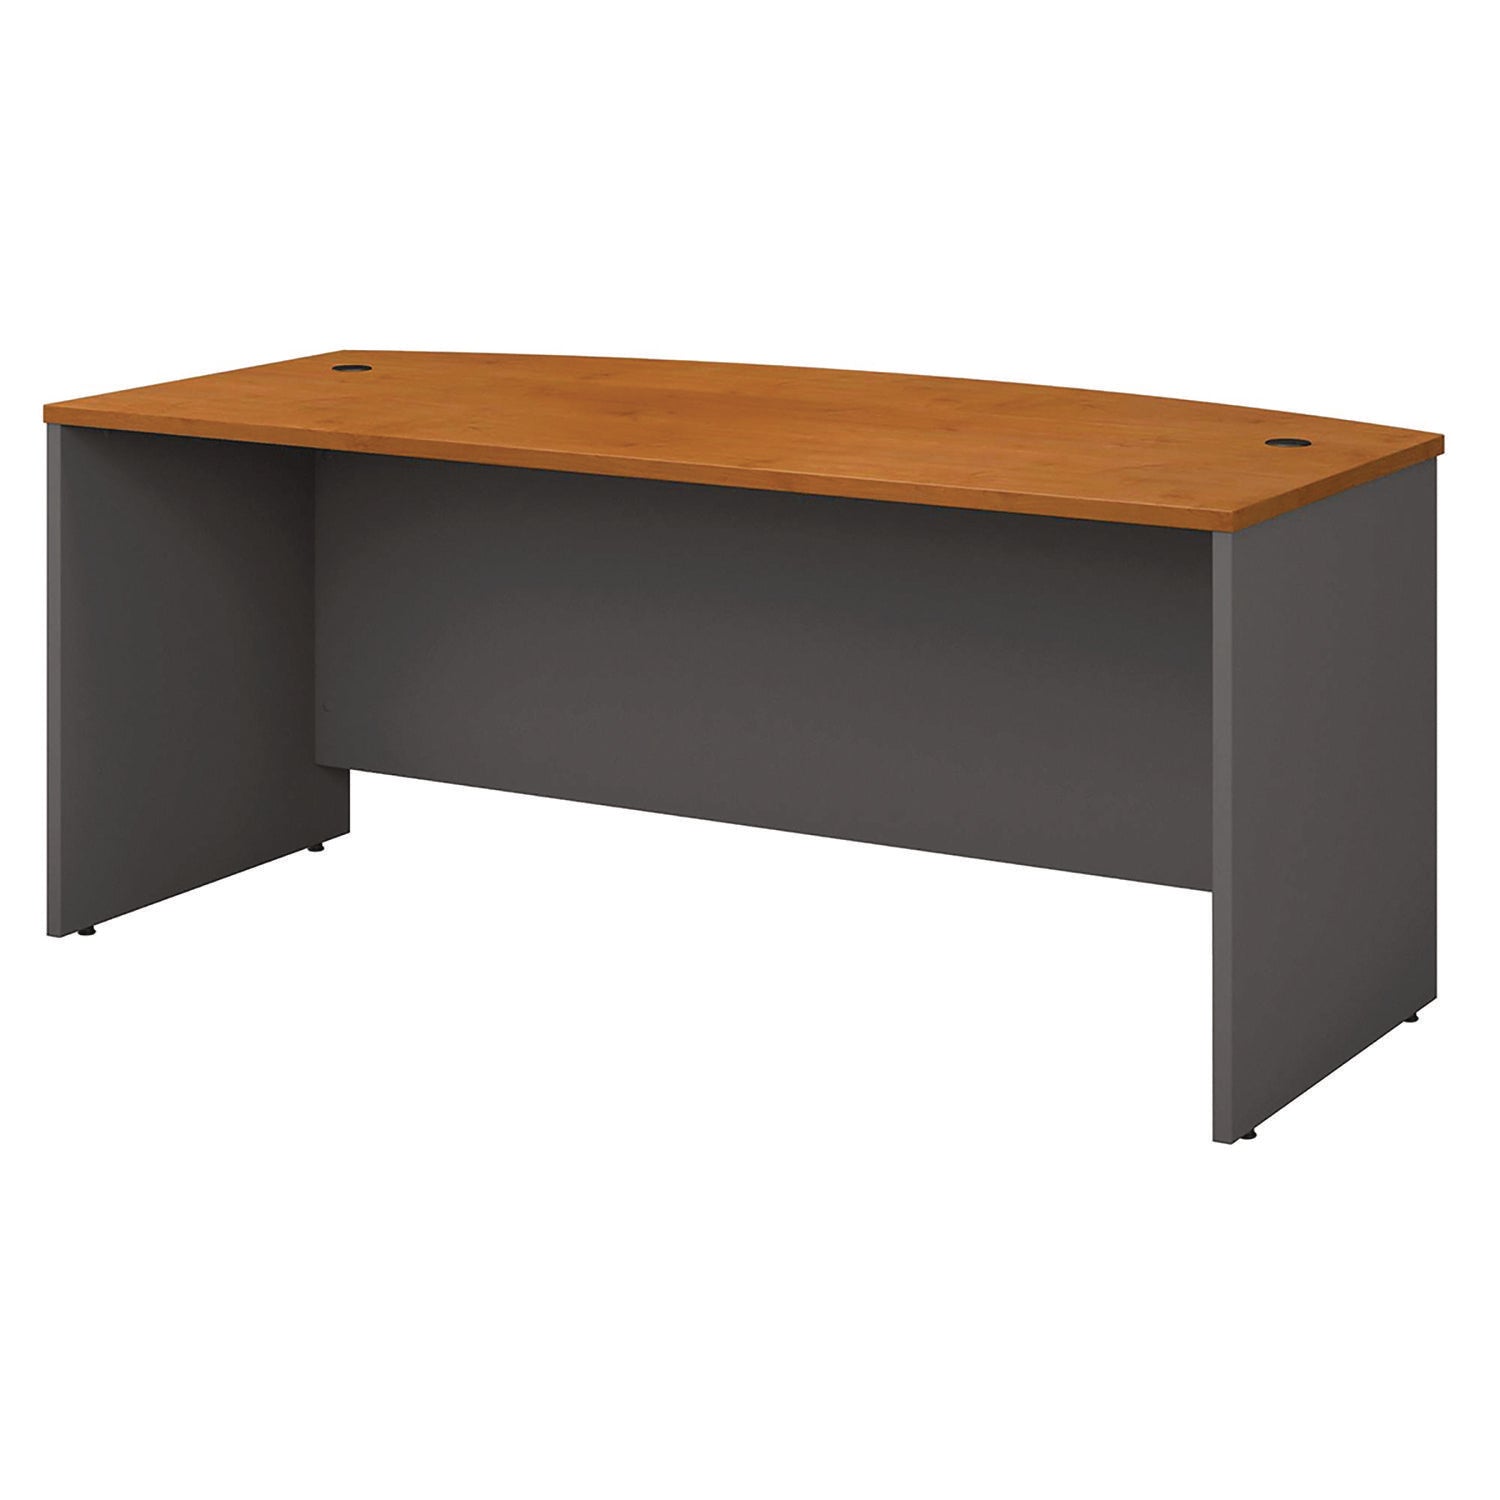 Series C Collection Bow Front Desk, 71.13" x 36.13" x 29.88", Natural Cherry/Graphite Gray - 